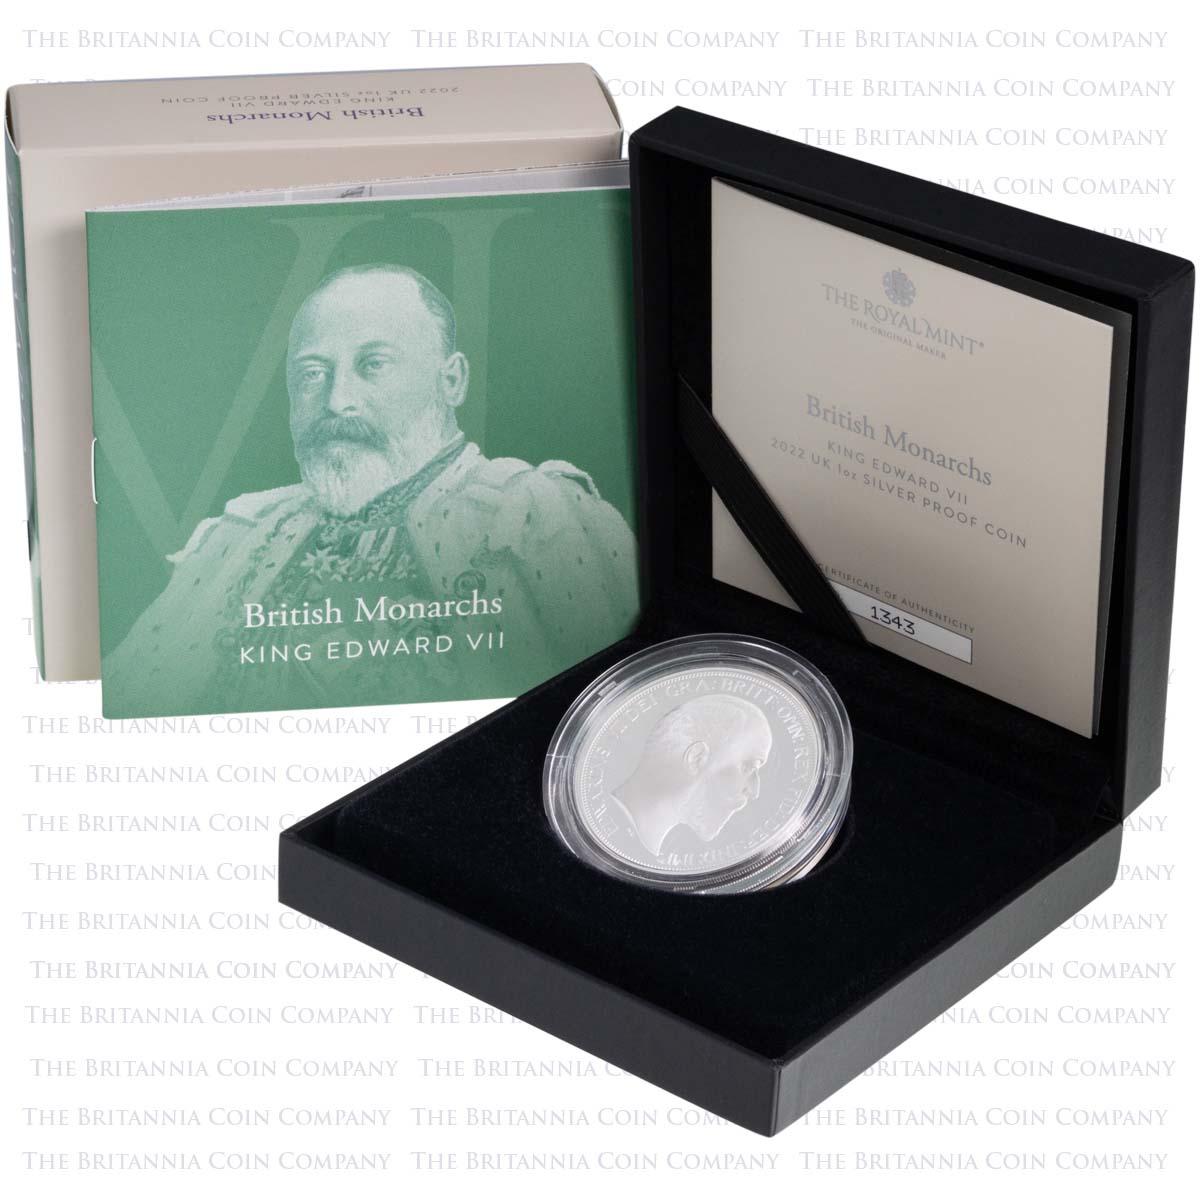 UK22E7S1O 2022 British Monarchs King Edward VII One Ounce Silver Proof Coin Boxed